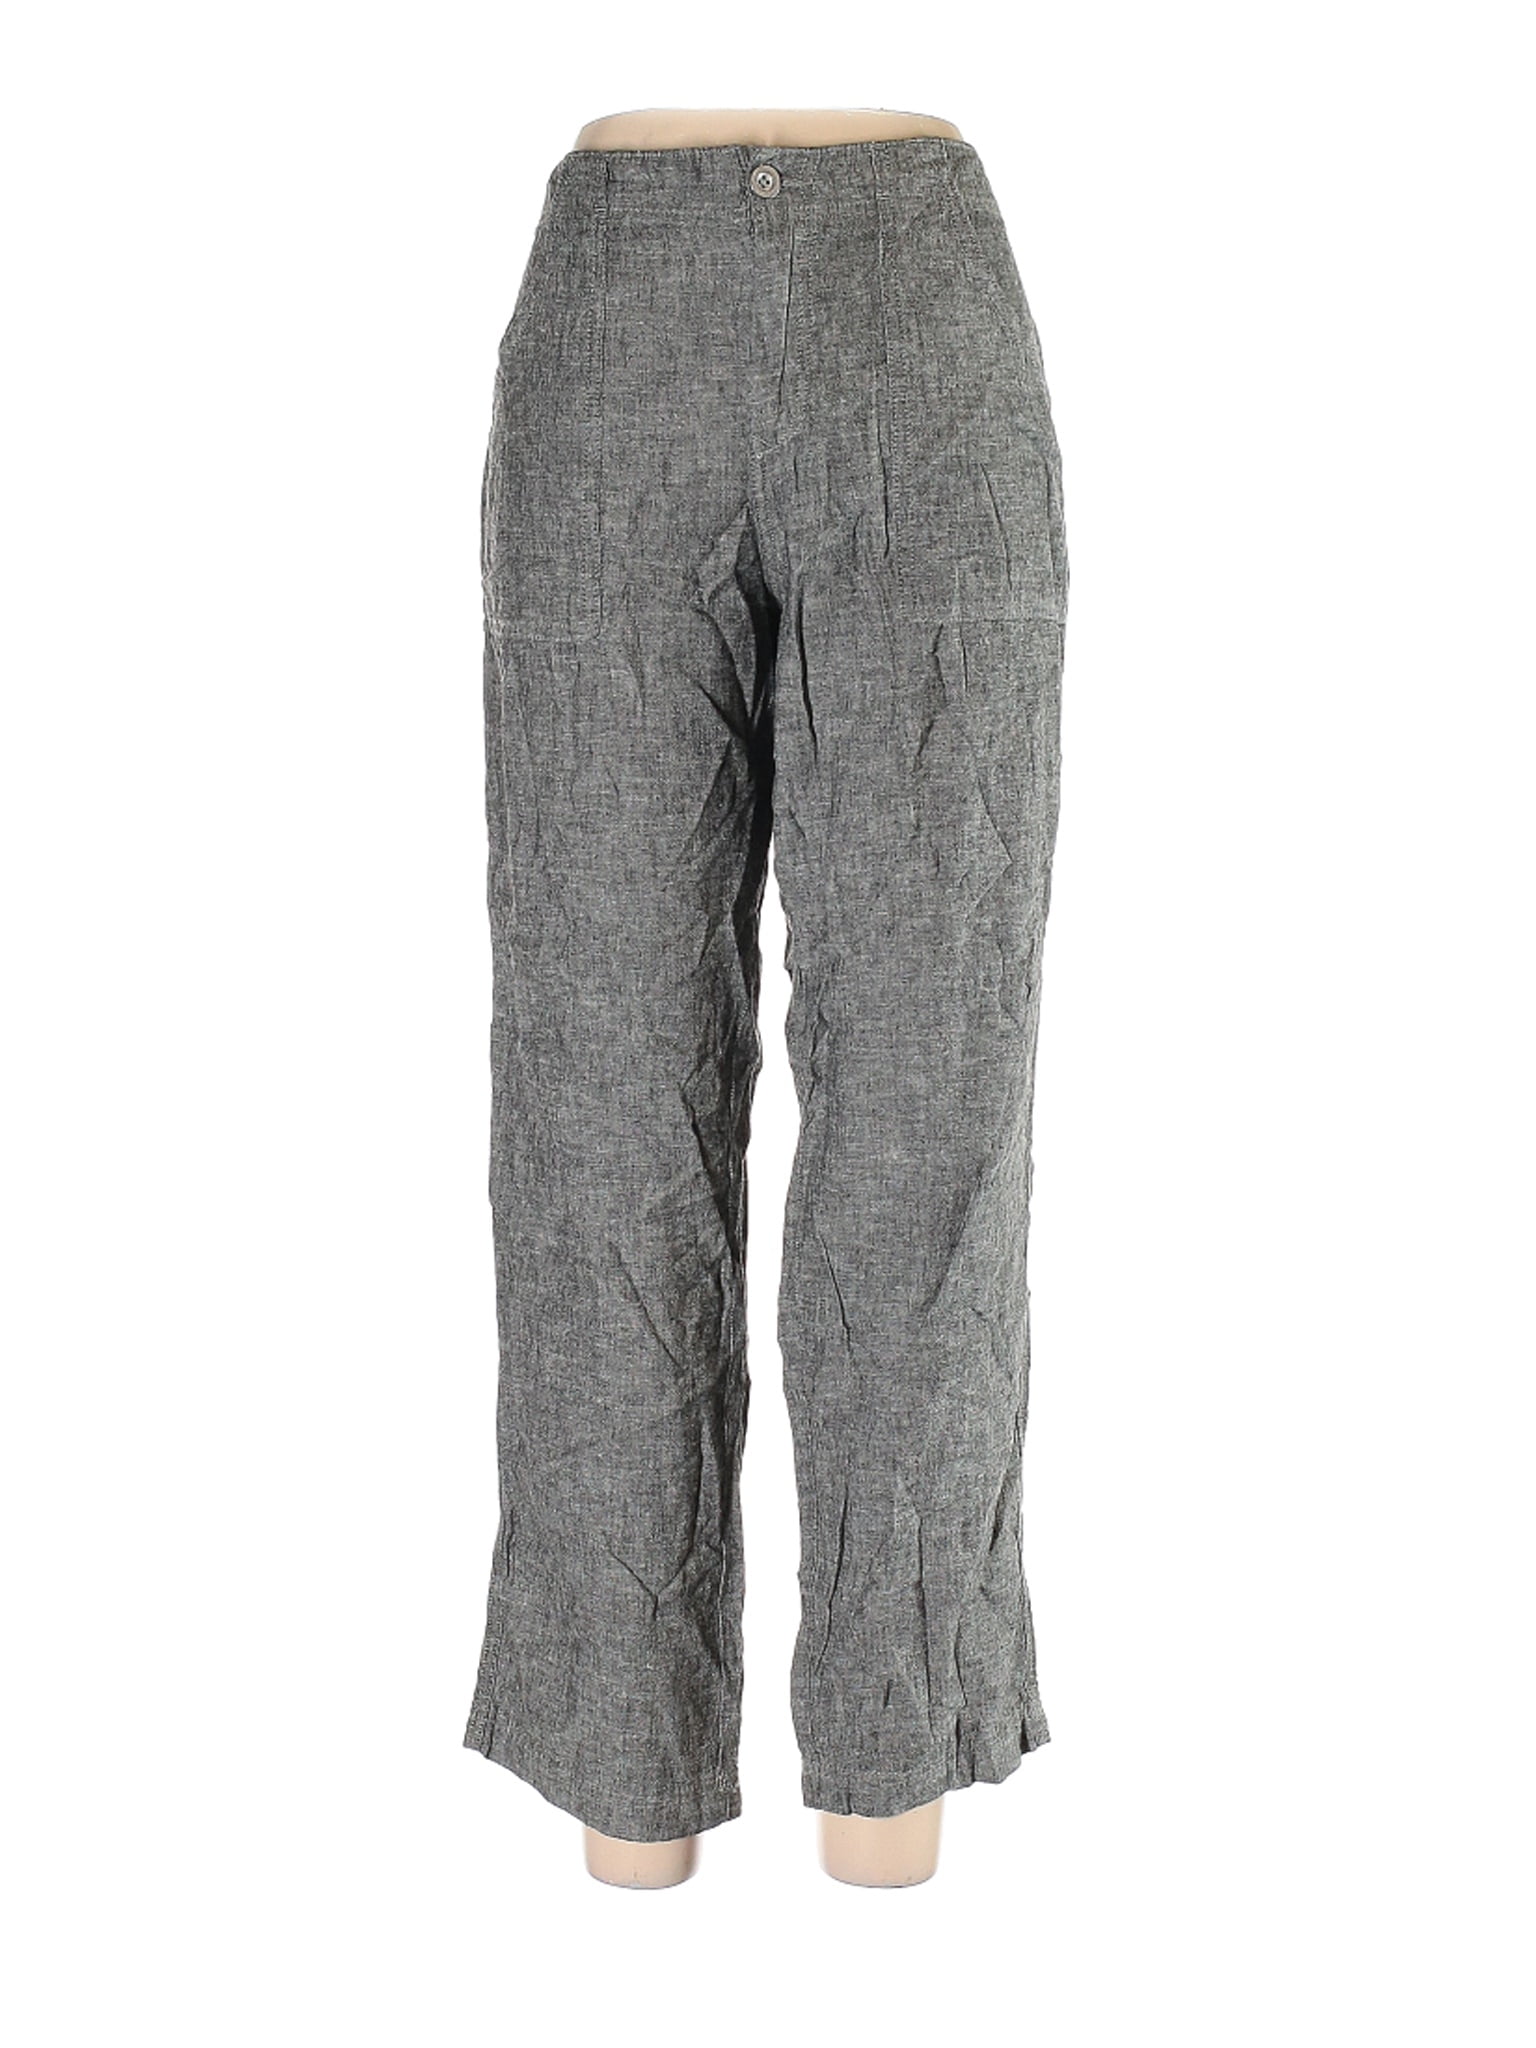 F&F Clothing - Pre-Owned F&F Clothing Women's Size 10 Linen Pants ...